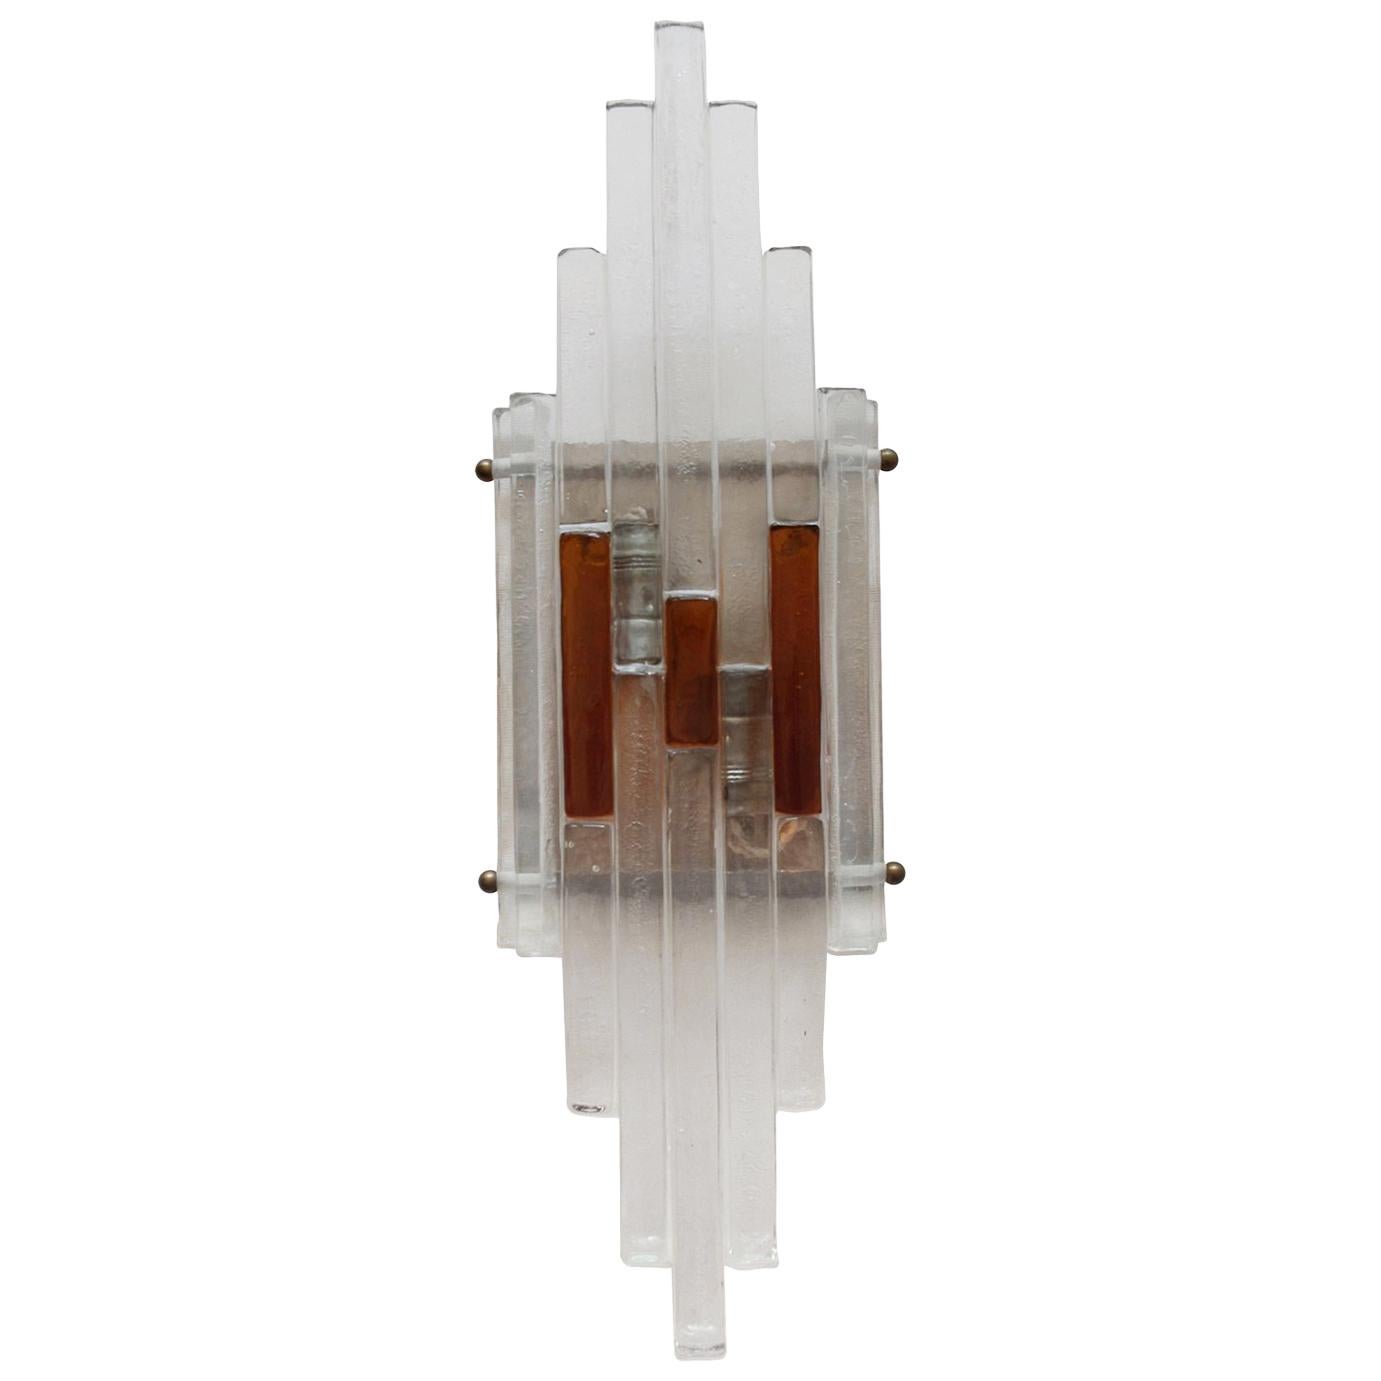 Italian Vintage Sculptural Murano Glass Wall Flush Mount Sconce, 1960s